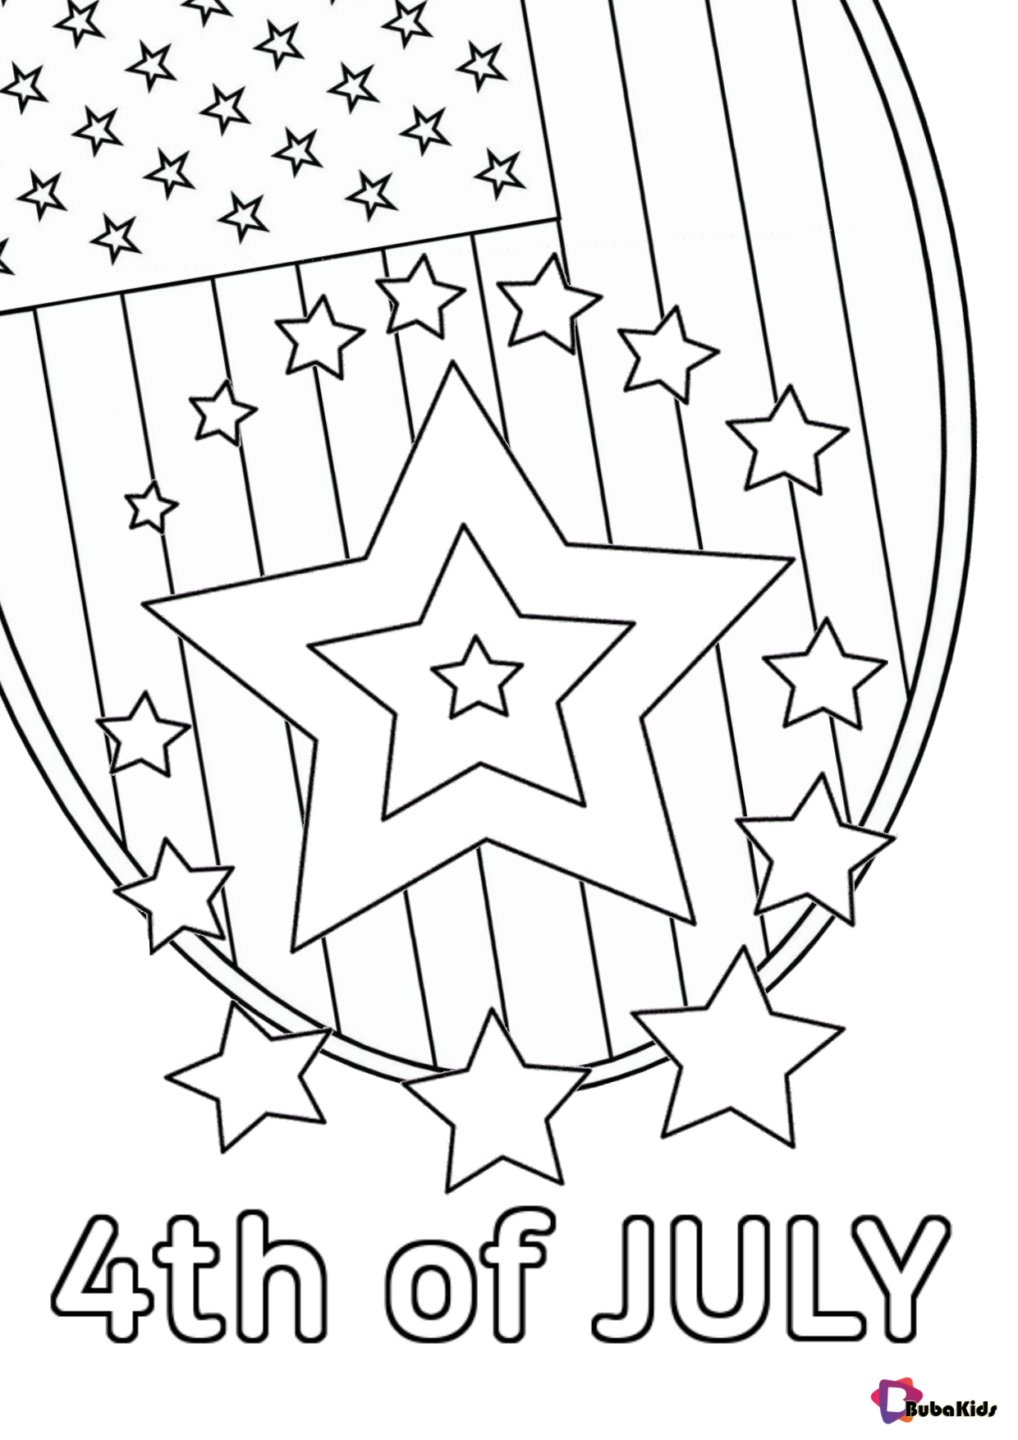 us independence day 4th of july coloring page